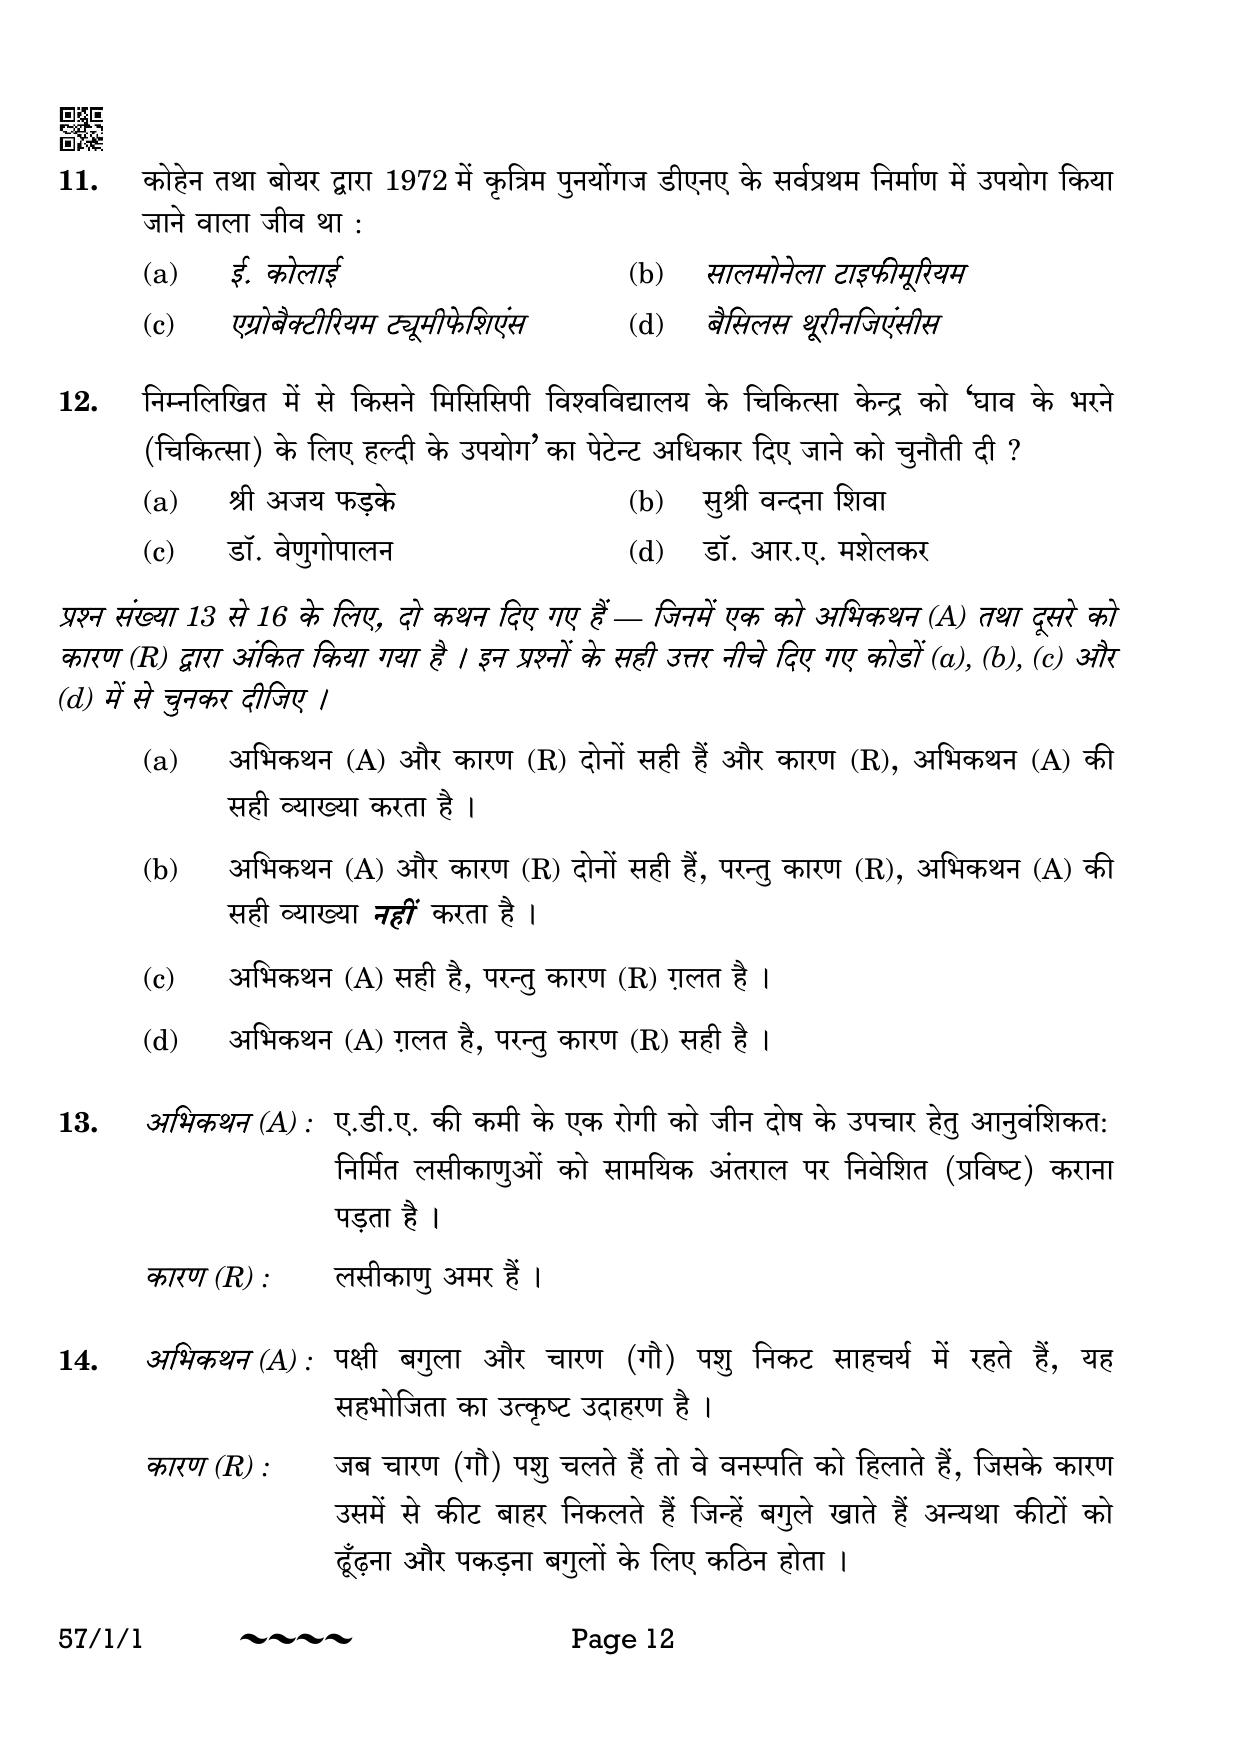 CBSE Class 12 57-1-1 Biology 2023 Question Paper - Page 12